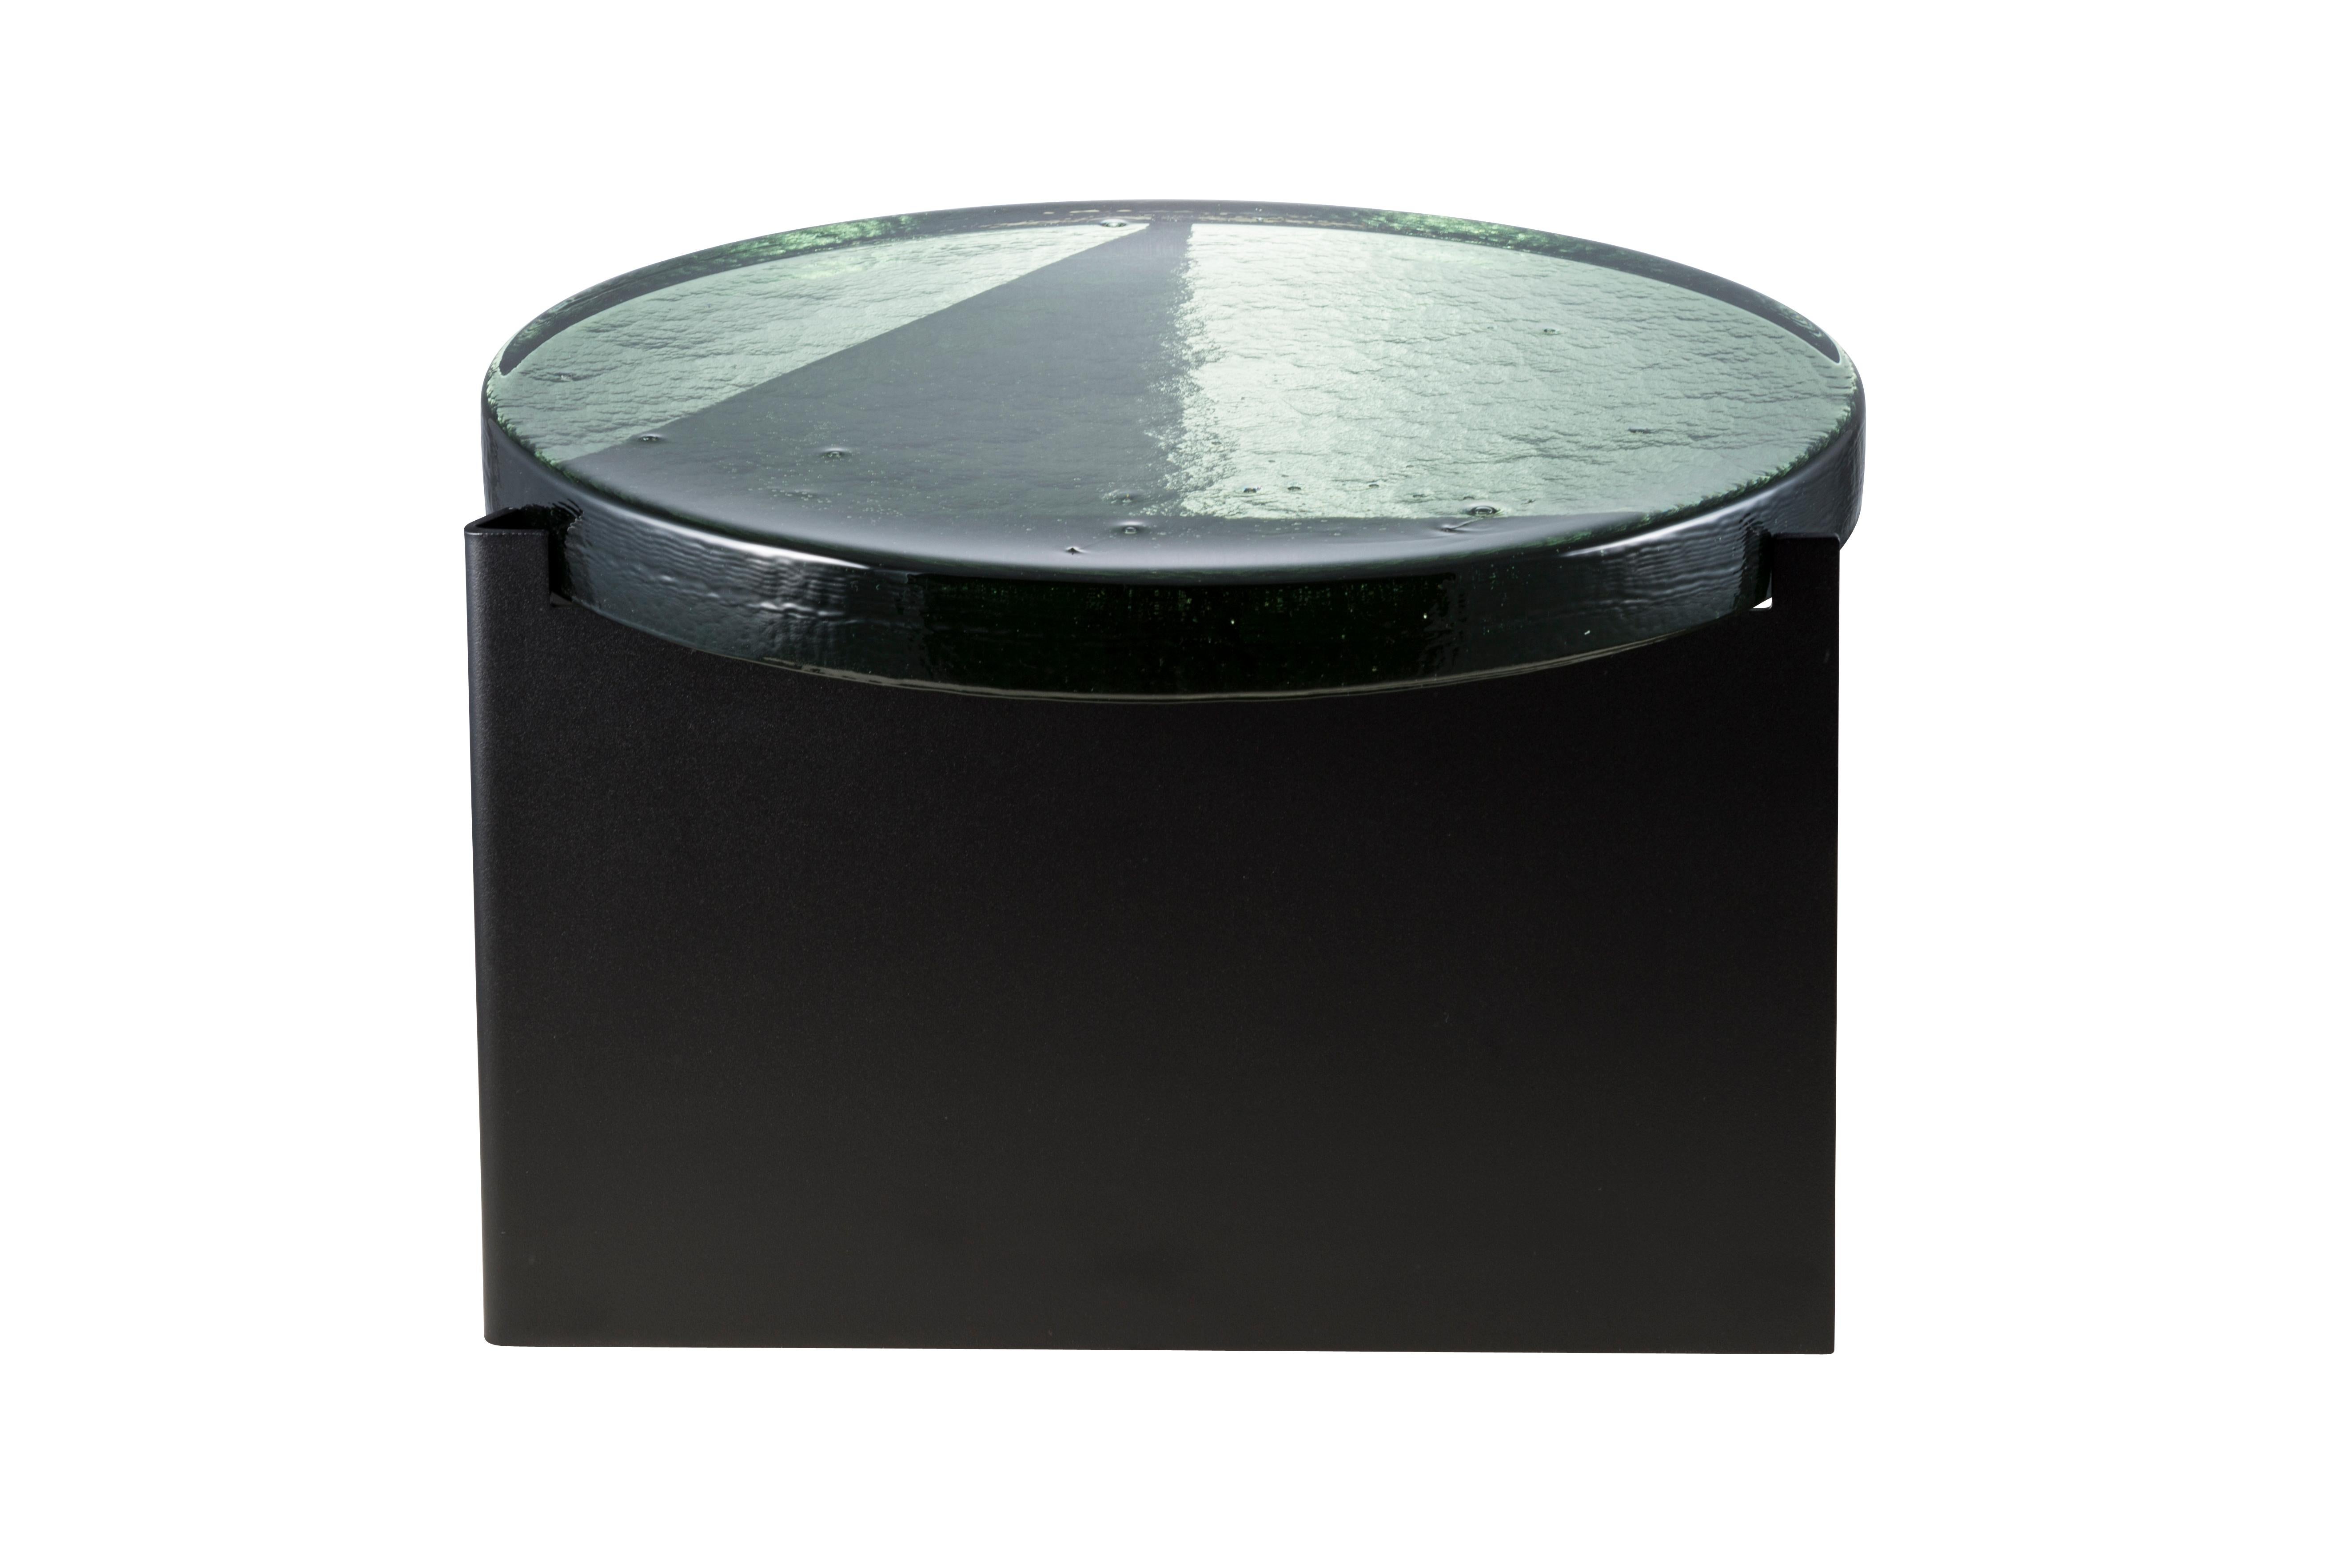 Alwa one big green black coffee table by Pulpo.
Dimensions: D56 x H35 cm.
Materials: casted glass; powder coated steel 

Also available in different finishes.

Normally, glass is regarded as being lightweight with sharp edges. In contrast,